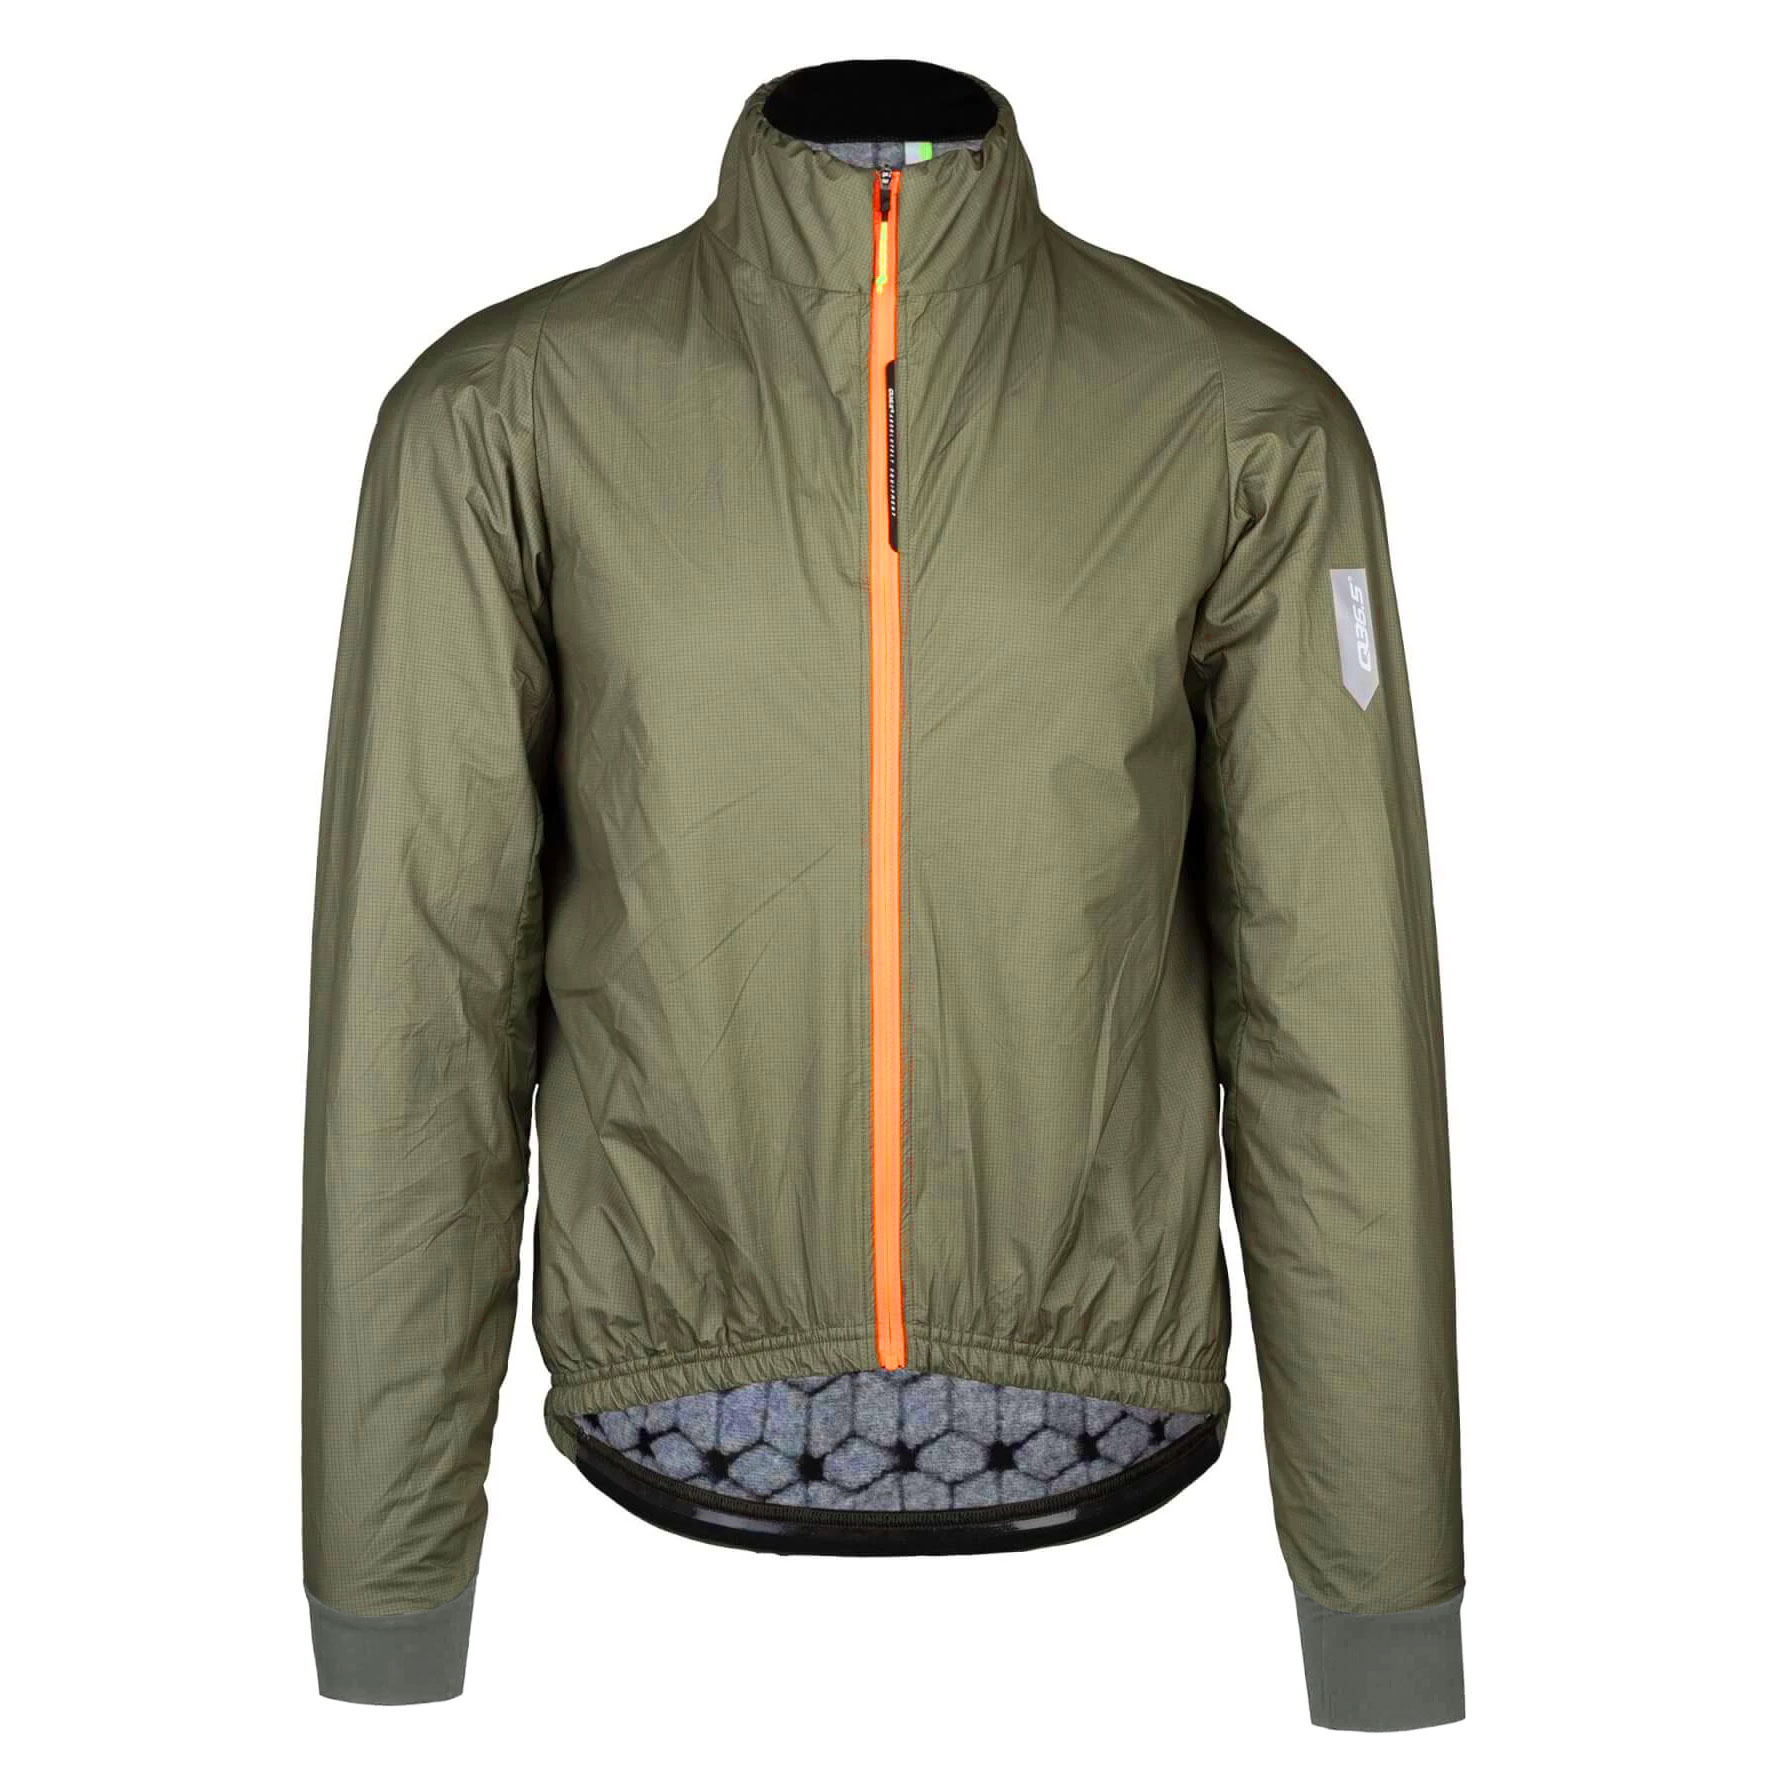 Picture of Q36.5 Adventure Winter Jacket - olive green